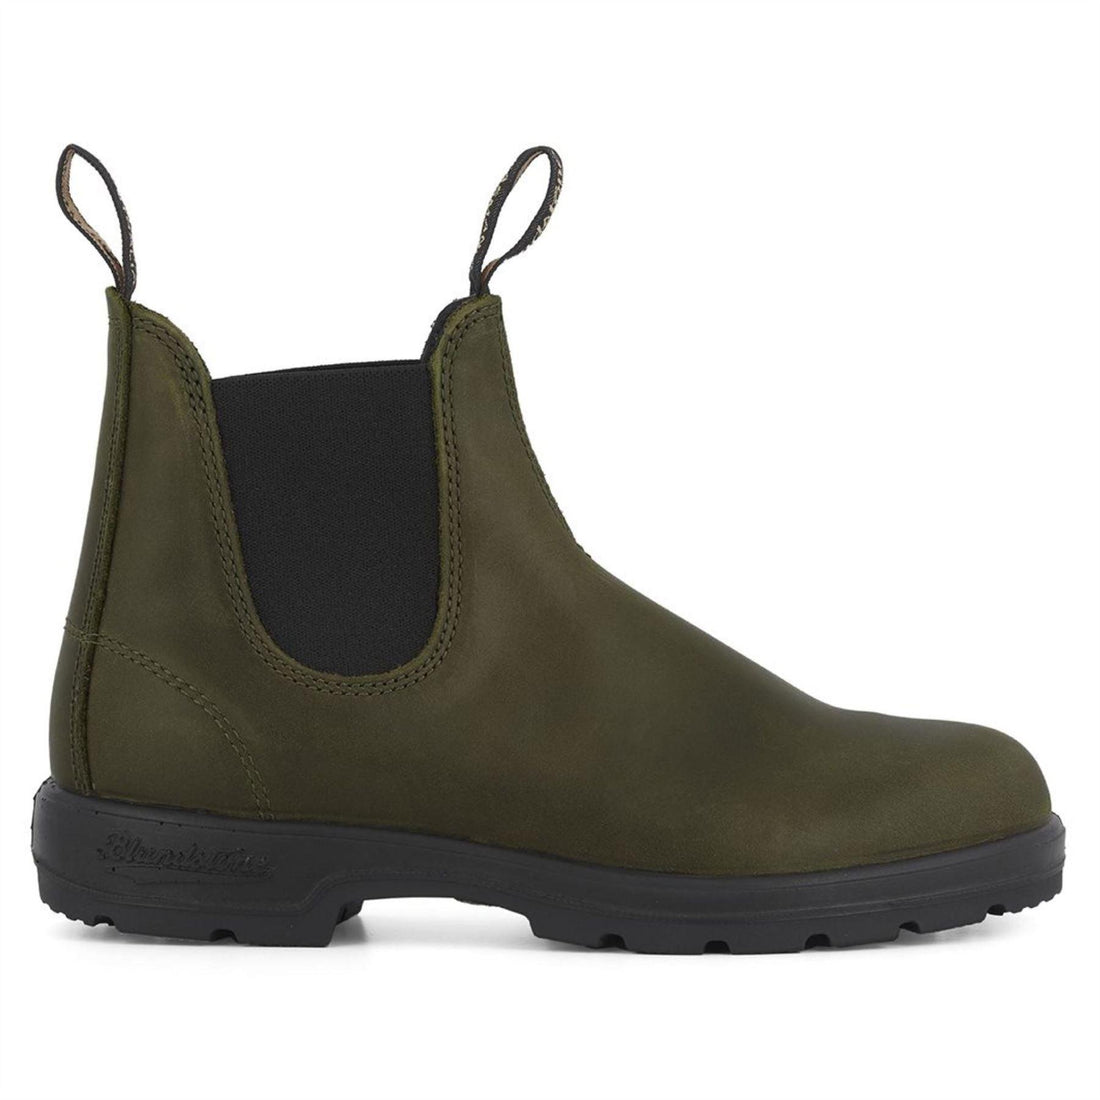 Blundstone 2052 Green Leather Chelsea Boots Olive Khaki Classic Slip On - Knighthood Store